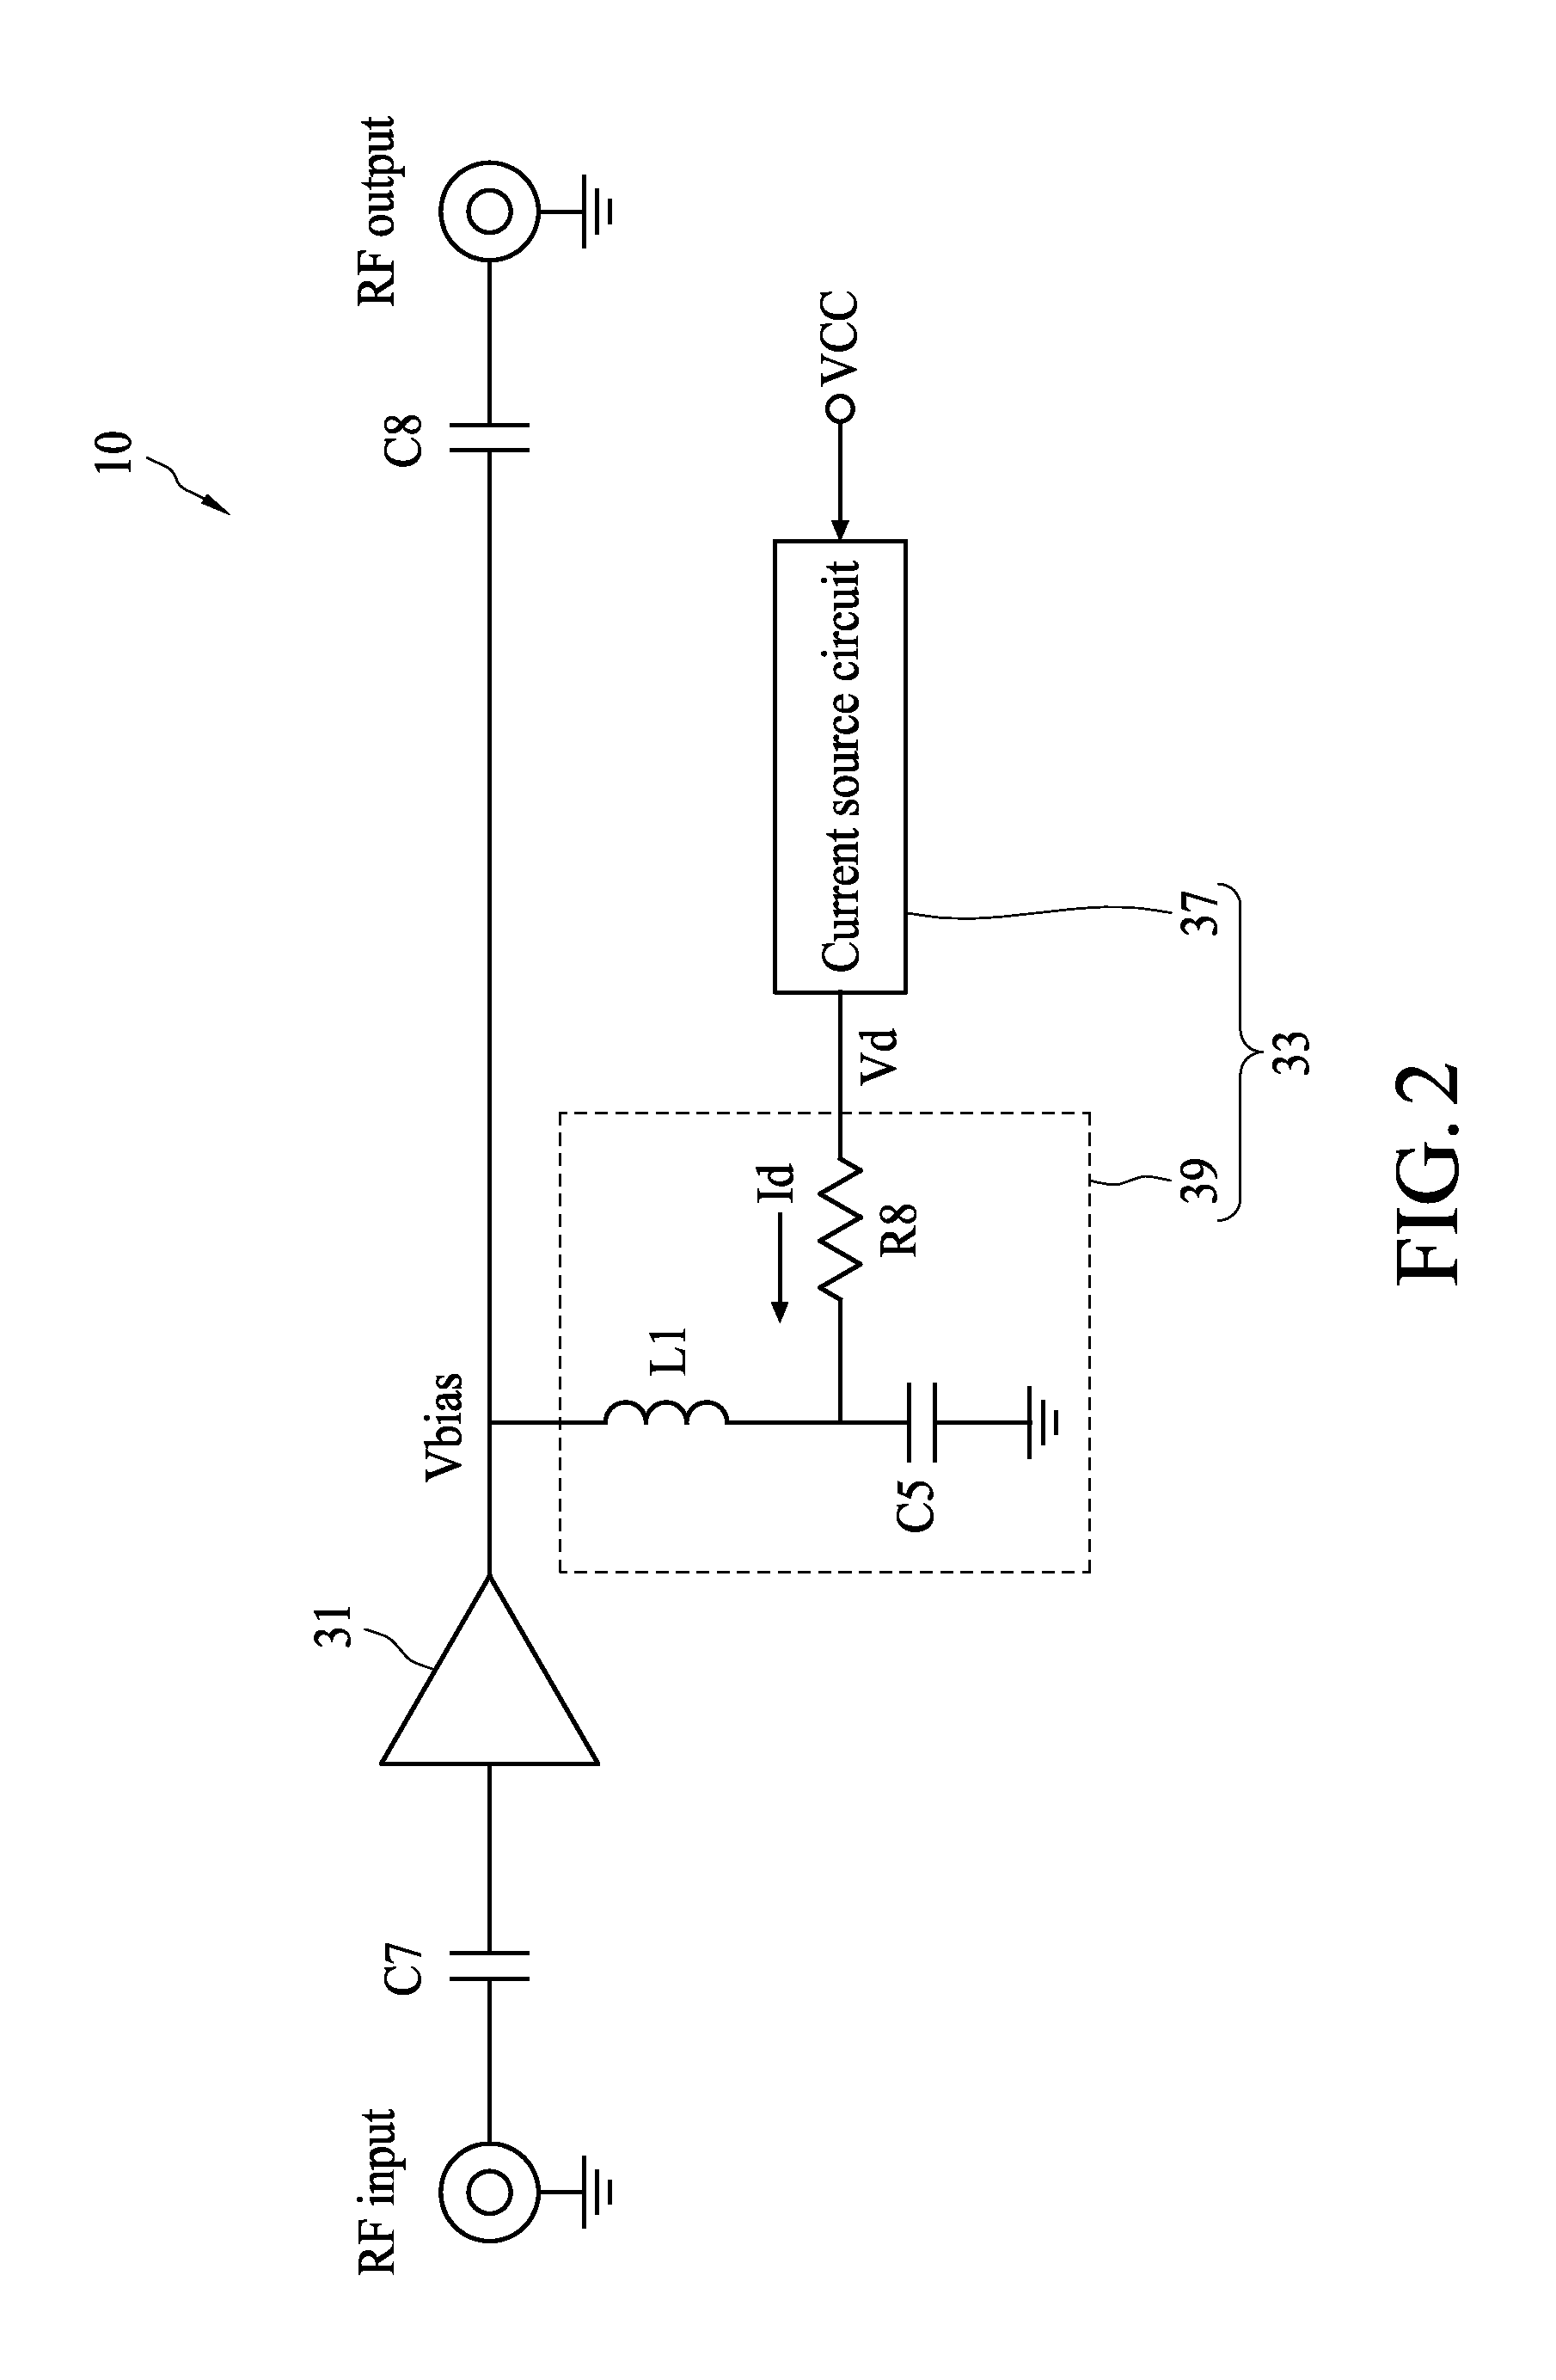 Precise current source circuit for bias supply of RF MMIC gain block amplifier application